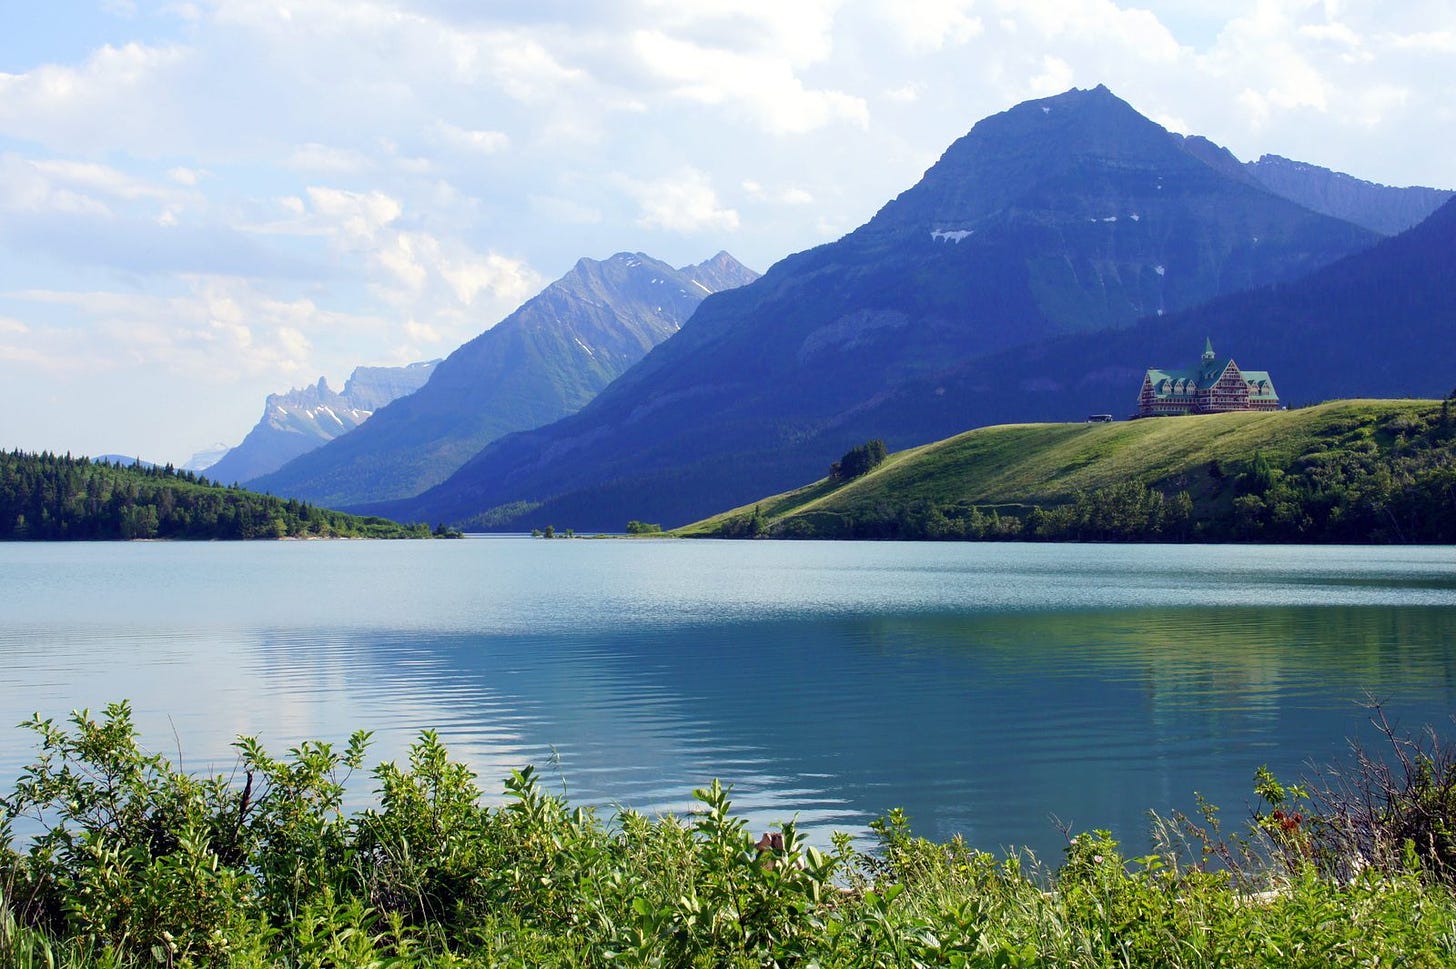 The lovely Waterton Lake and the Prince of Wales Hotel on its shore. We opted for a free basement at a host's instead!